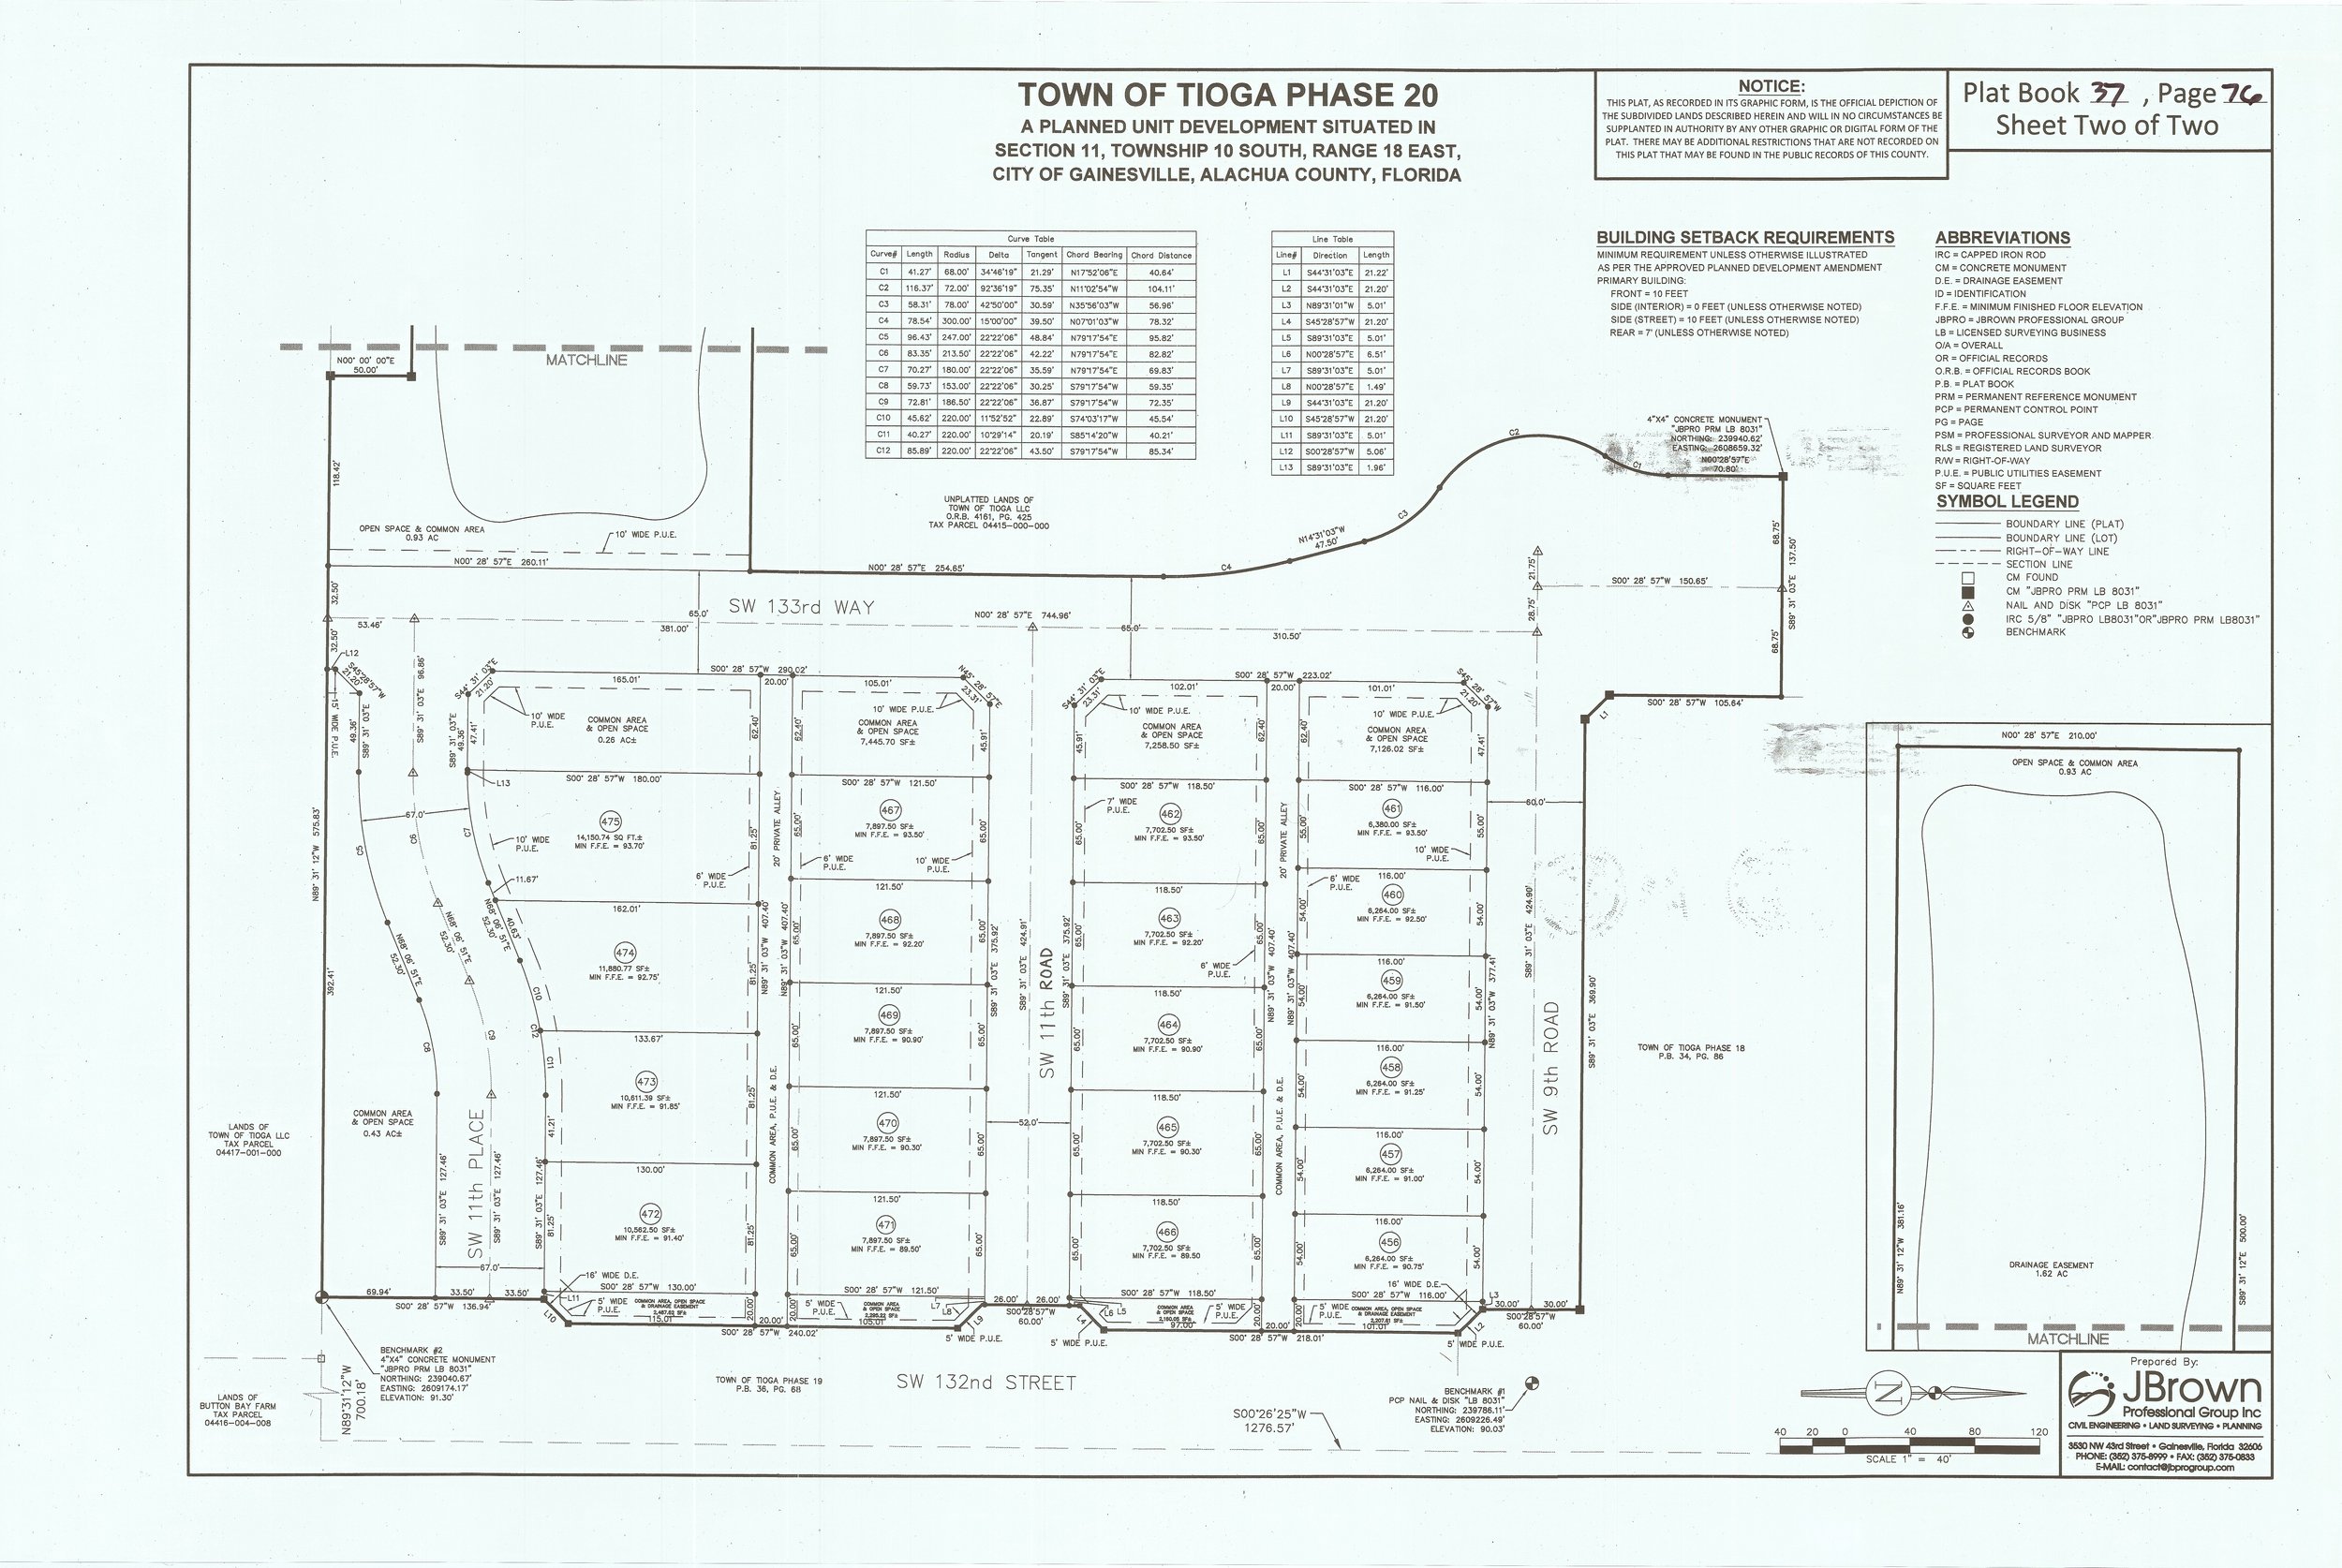 Tioga - Phase 20 Page 2 Recorded Plat Corrected.jpg